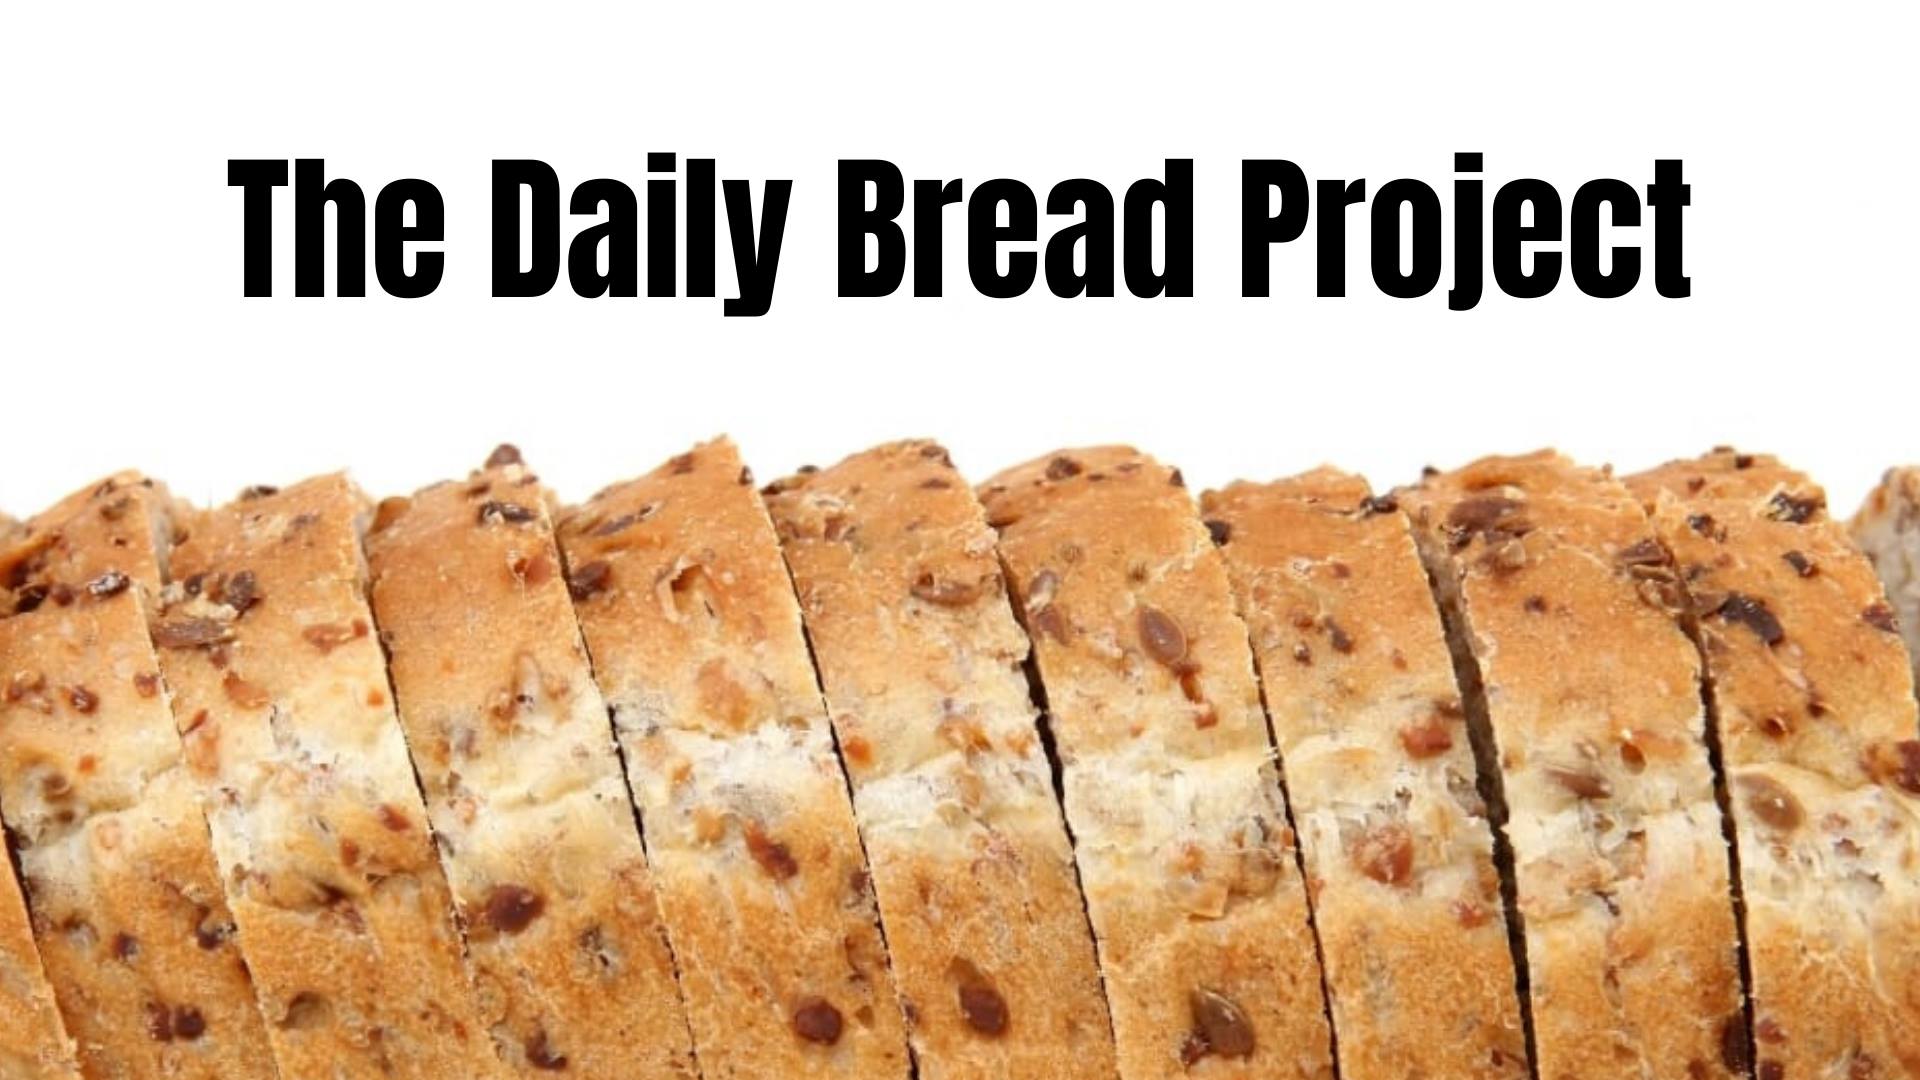 PODCAST: The Daily Bread Project